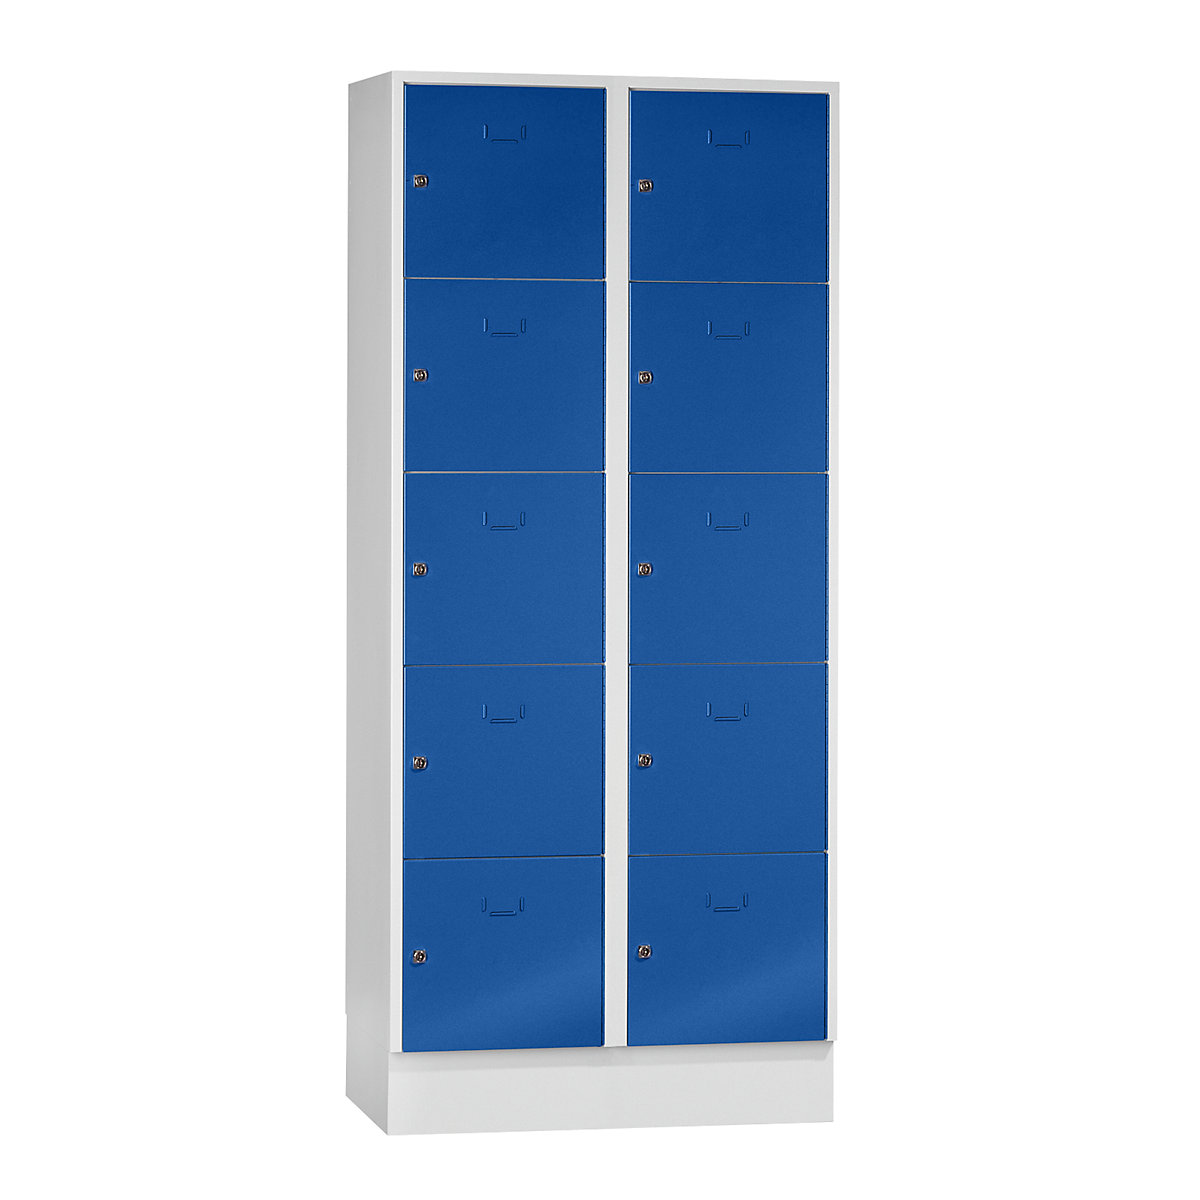 Cloakroom locker system – Wolf, 10 compartments, compartment width 400 mm, gentian blue / light grey-8